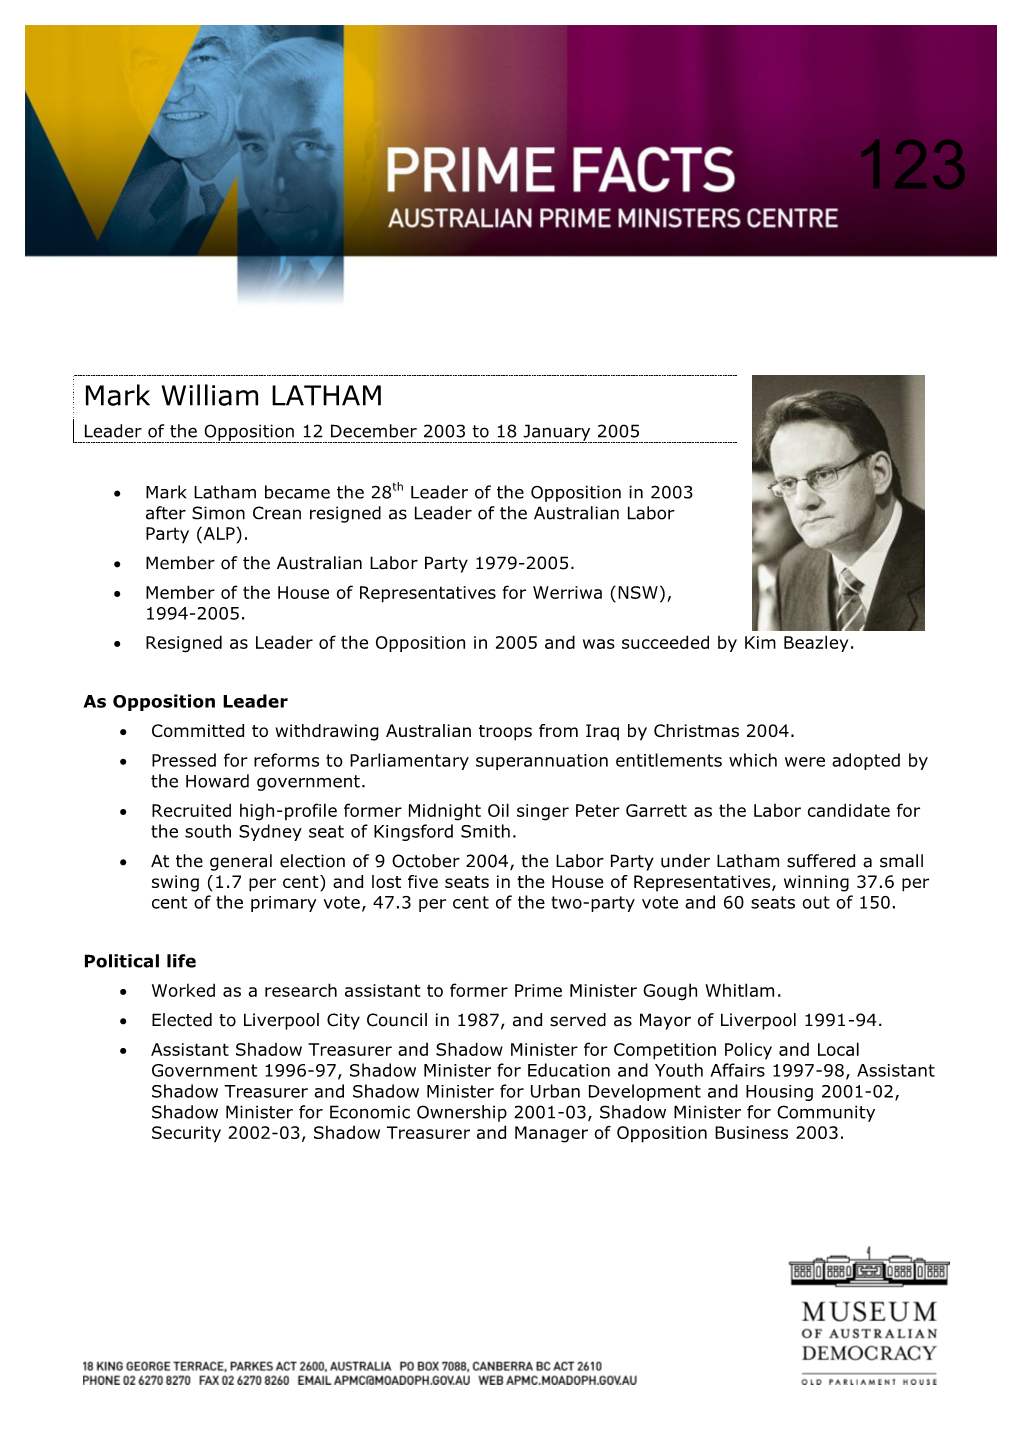 Mark William LATHAM Leader of the Opposition 12 December 2003 to 18 January 2005